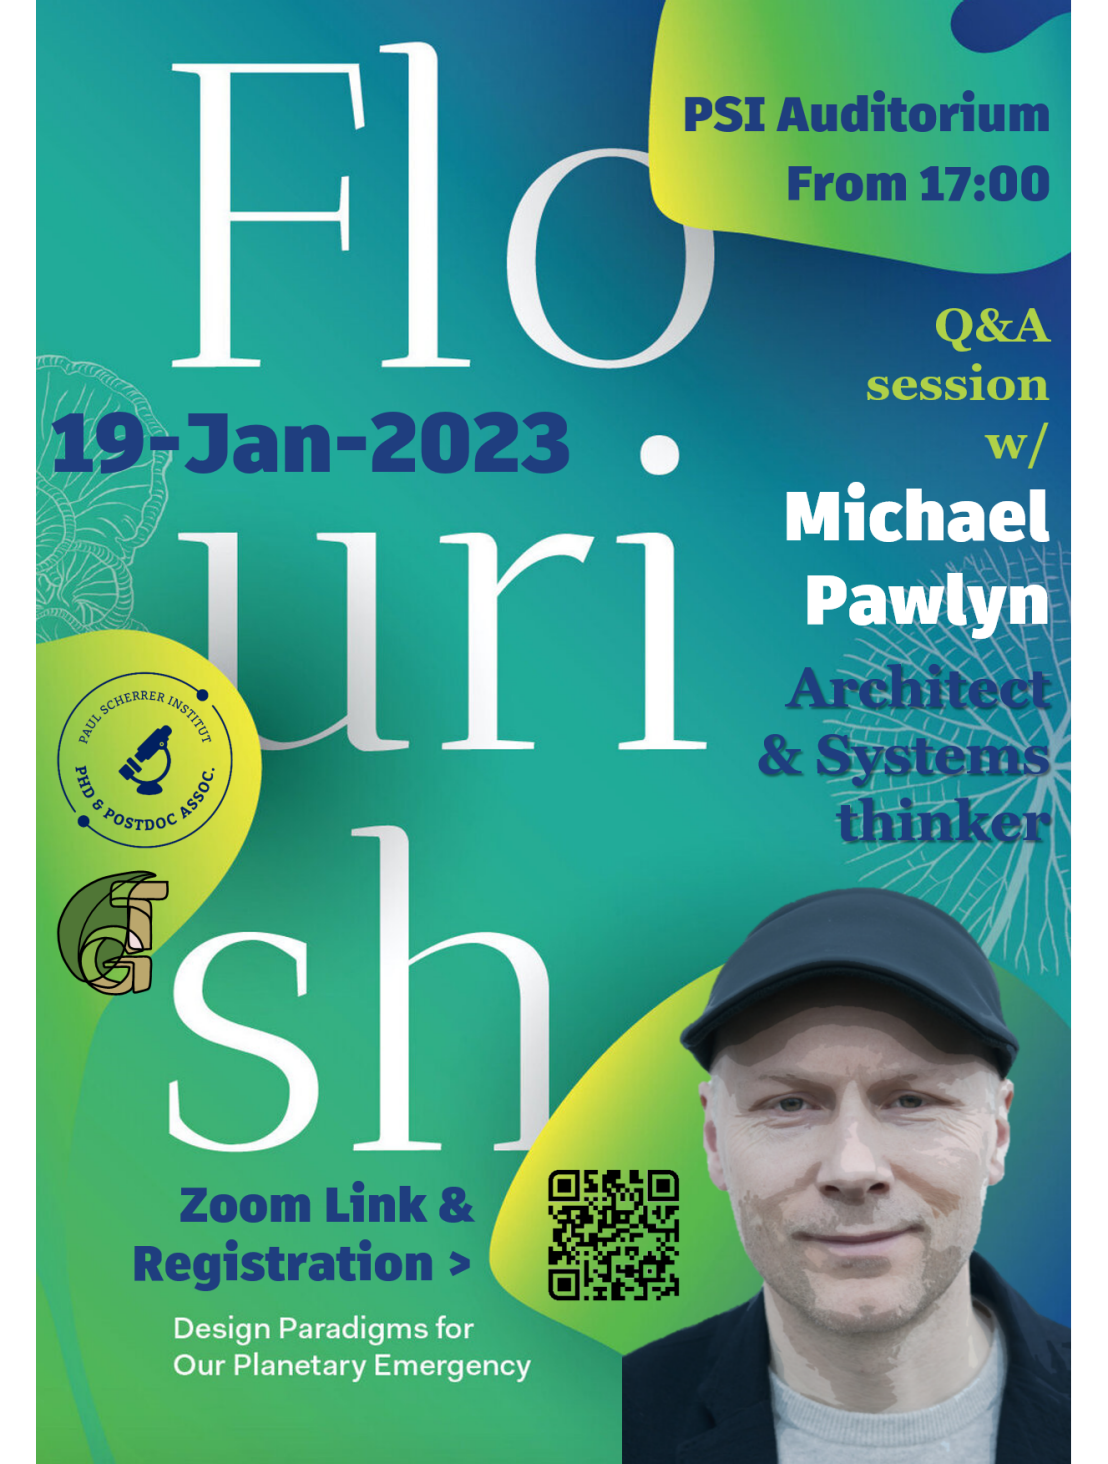 PSI Climate Seminar Series: Q&A with Michael Pawlyn, Architect & Systems thinker